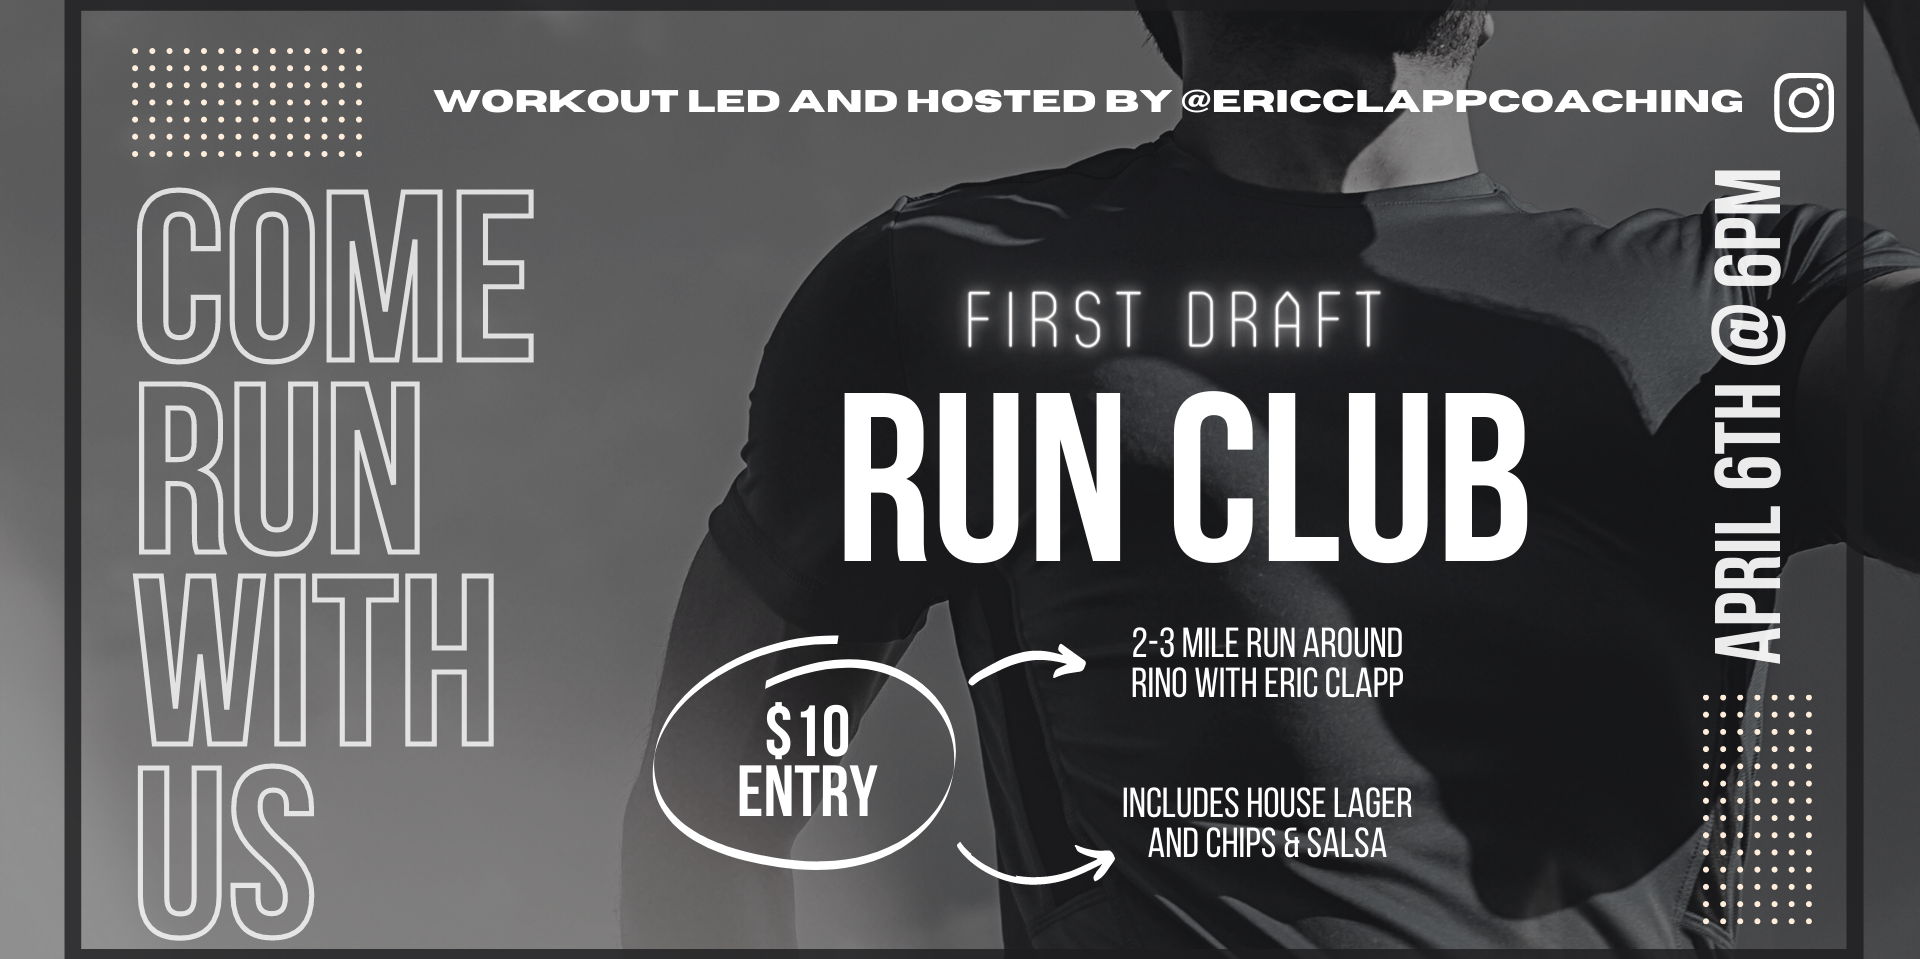 First Draft Run Club hosted by Eric Clapp promotional image